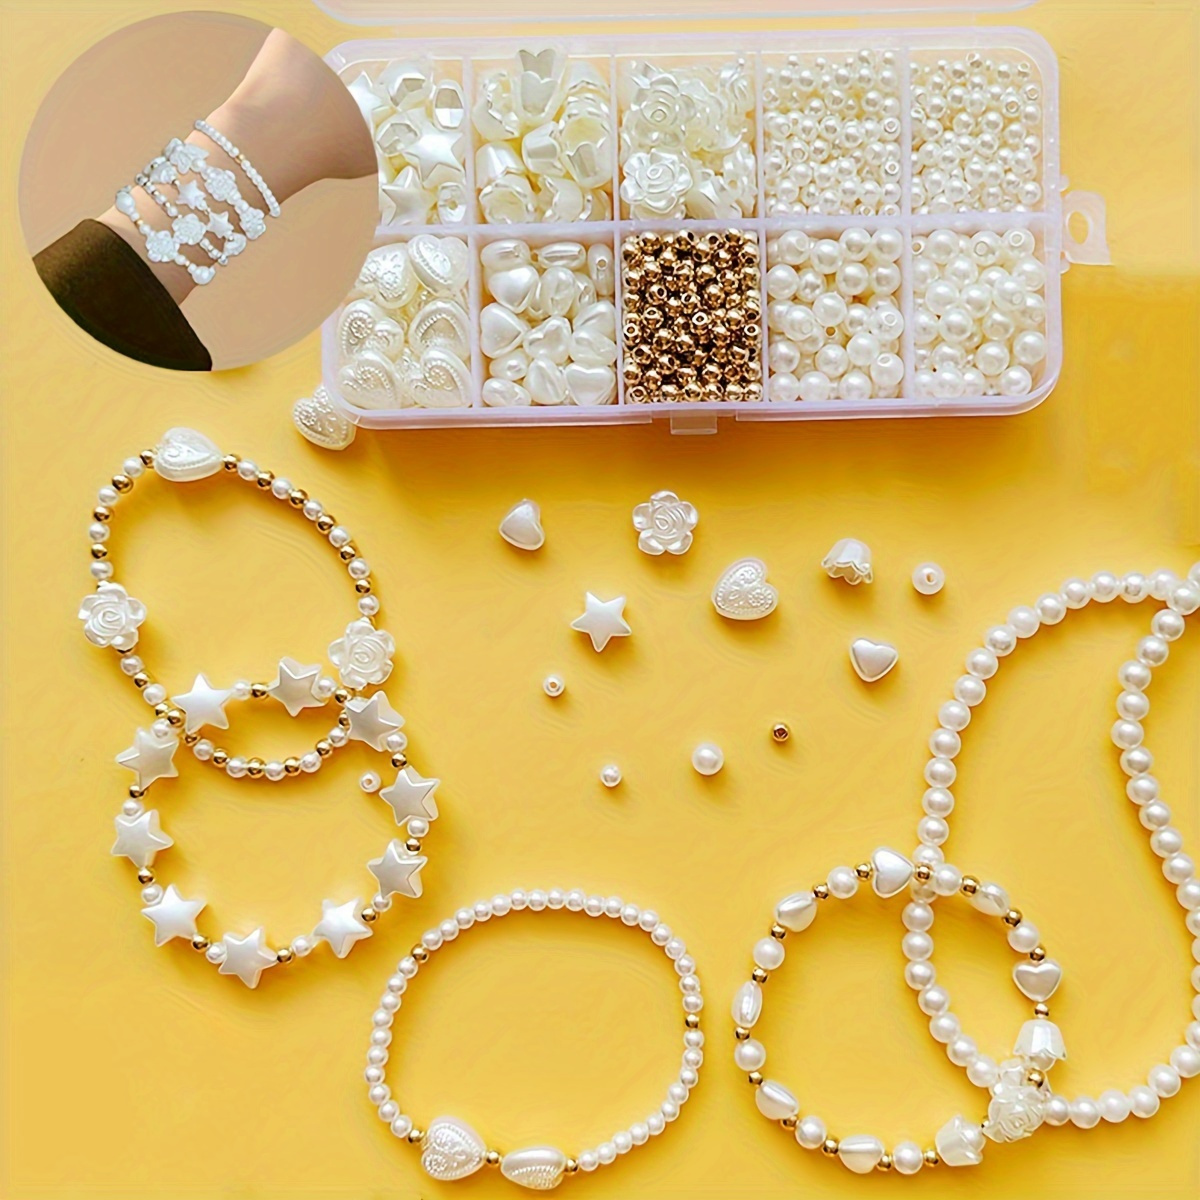 

800pcs White Mixed Acrylic Polished Golden Loose Beads For Jewelry Making Diy Elegant Bracelet Necklace Earrings Decors Handmade Beaded Craft Supplies